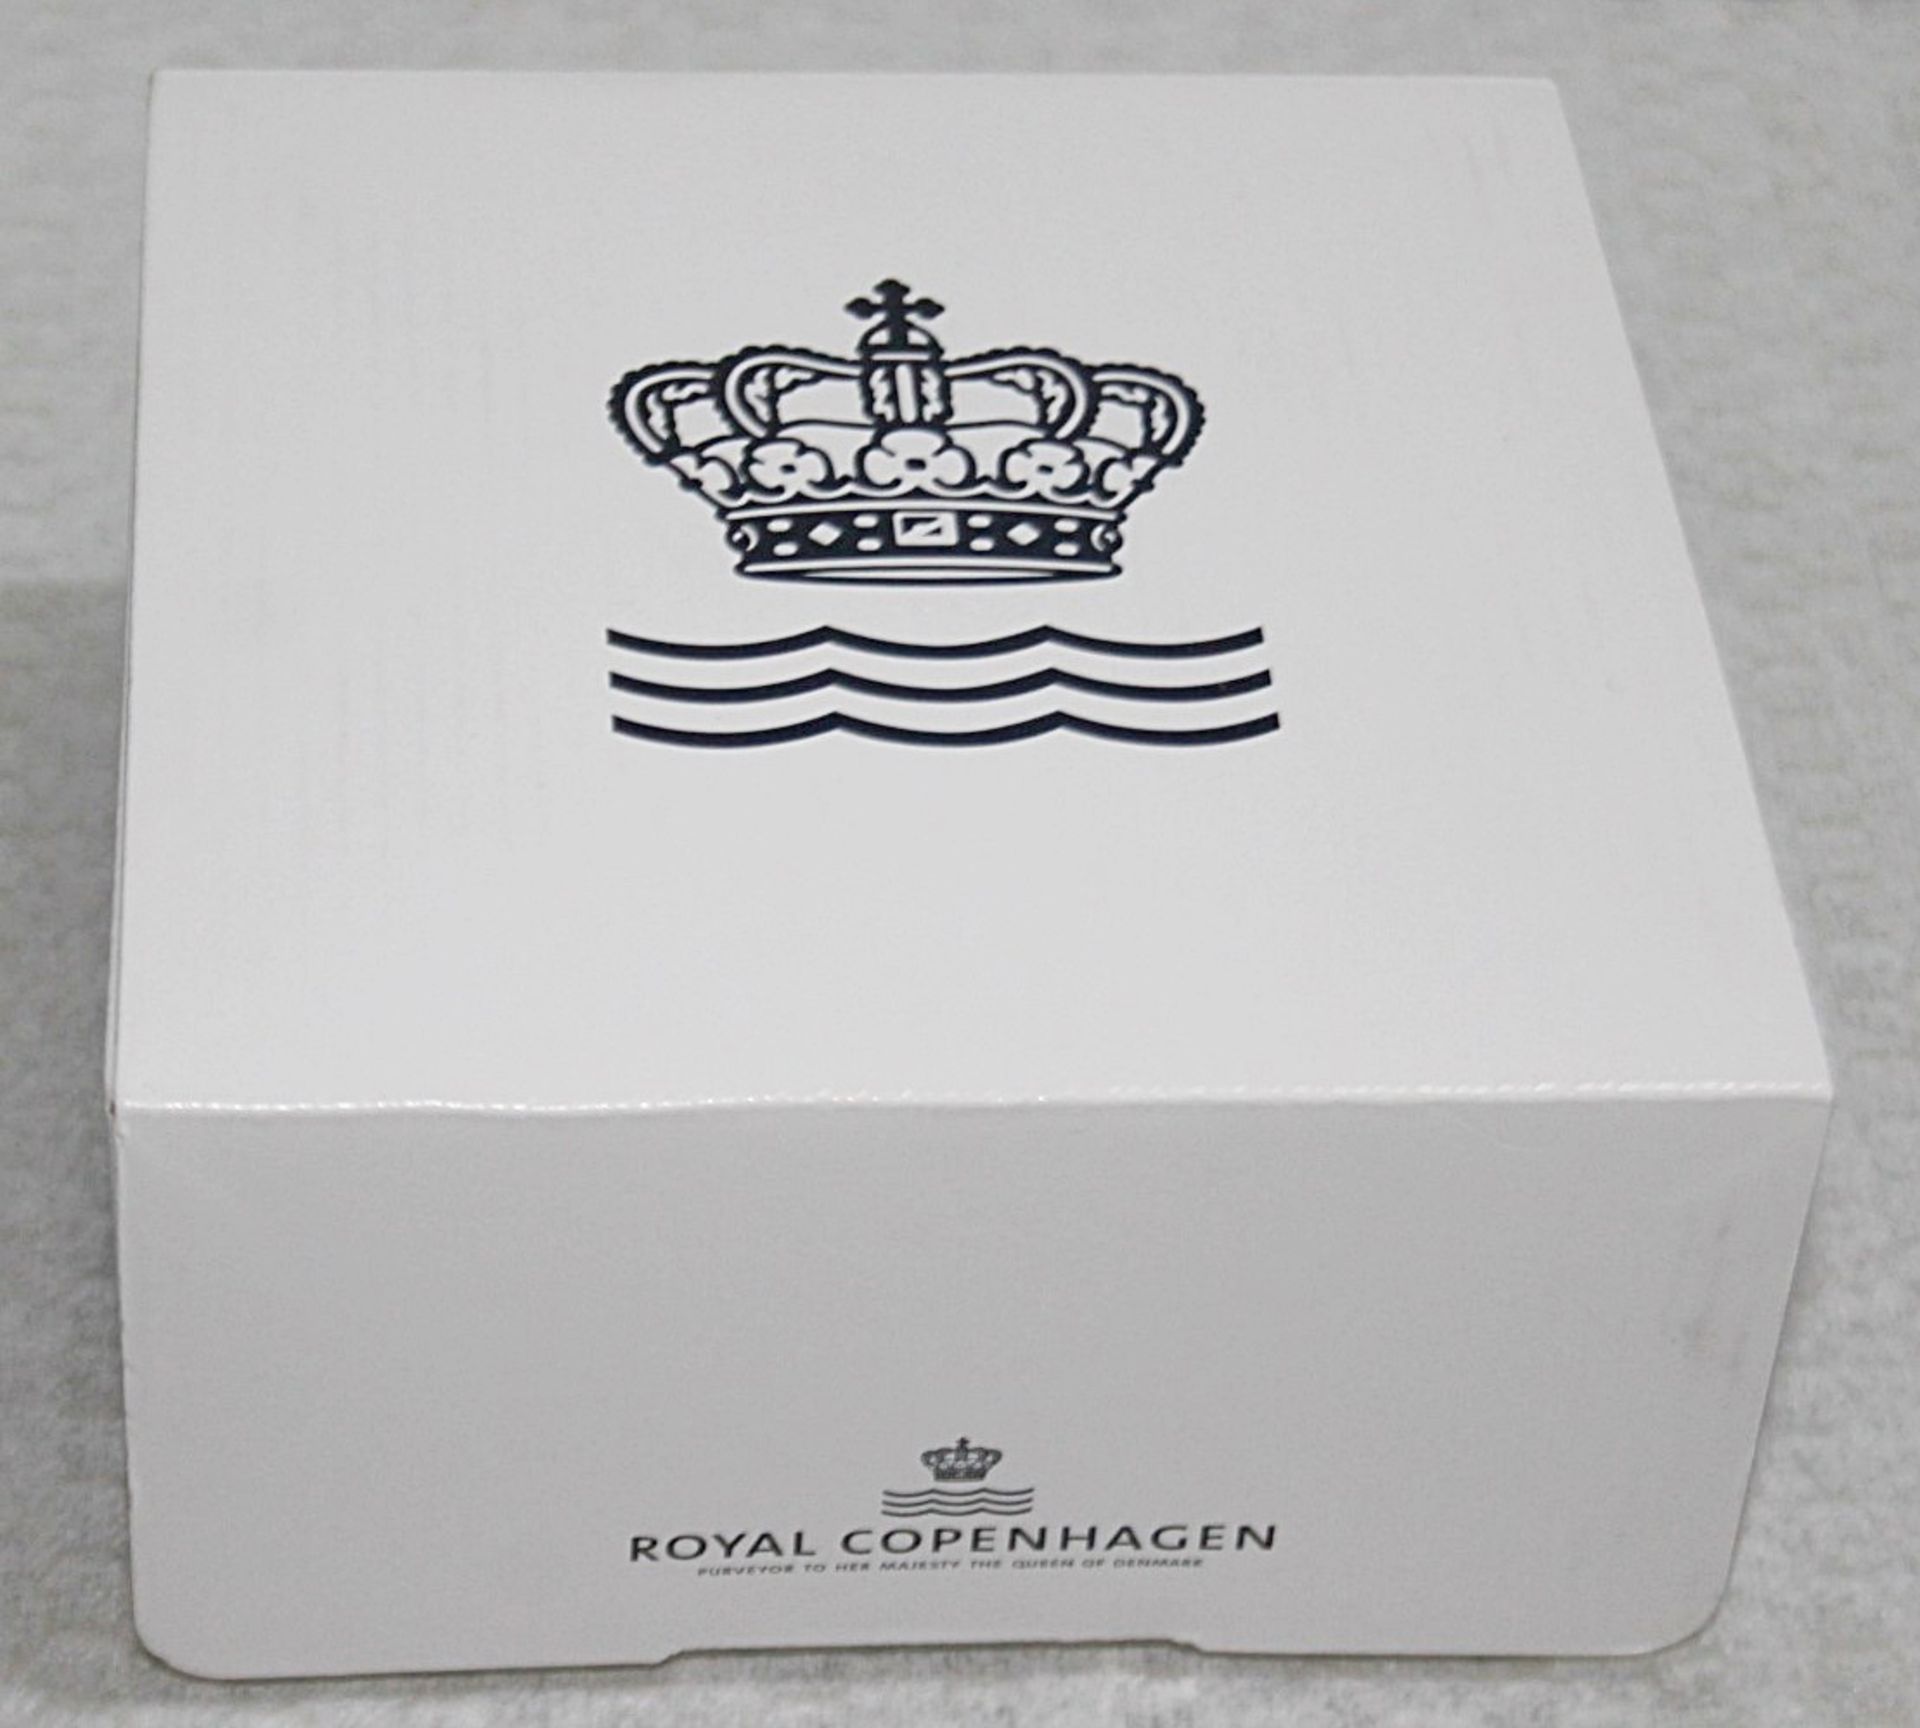 1 x ROYAL COPENHAGEN Princess Teacup and Saucer - Capacity: 200ml - Unused Boxed Stock - Ref: - Image 6 of 10